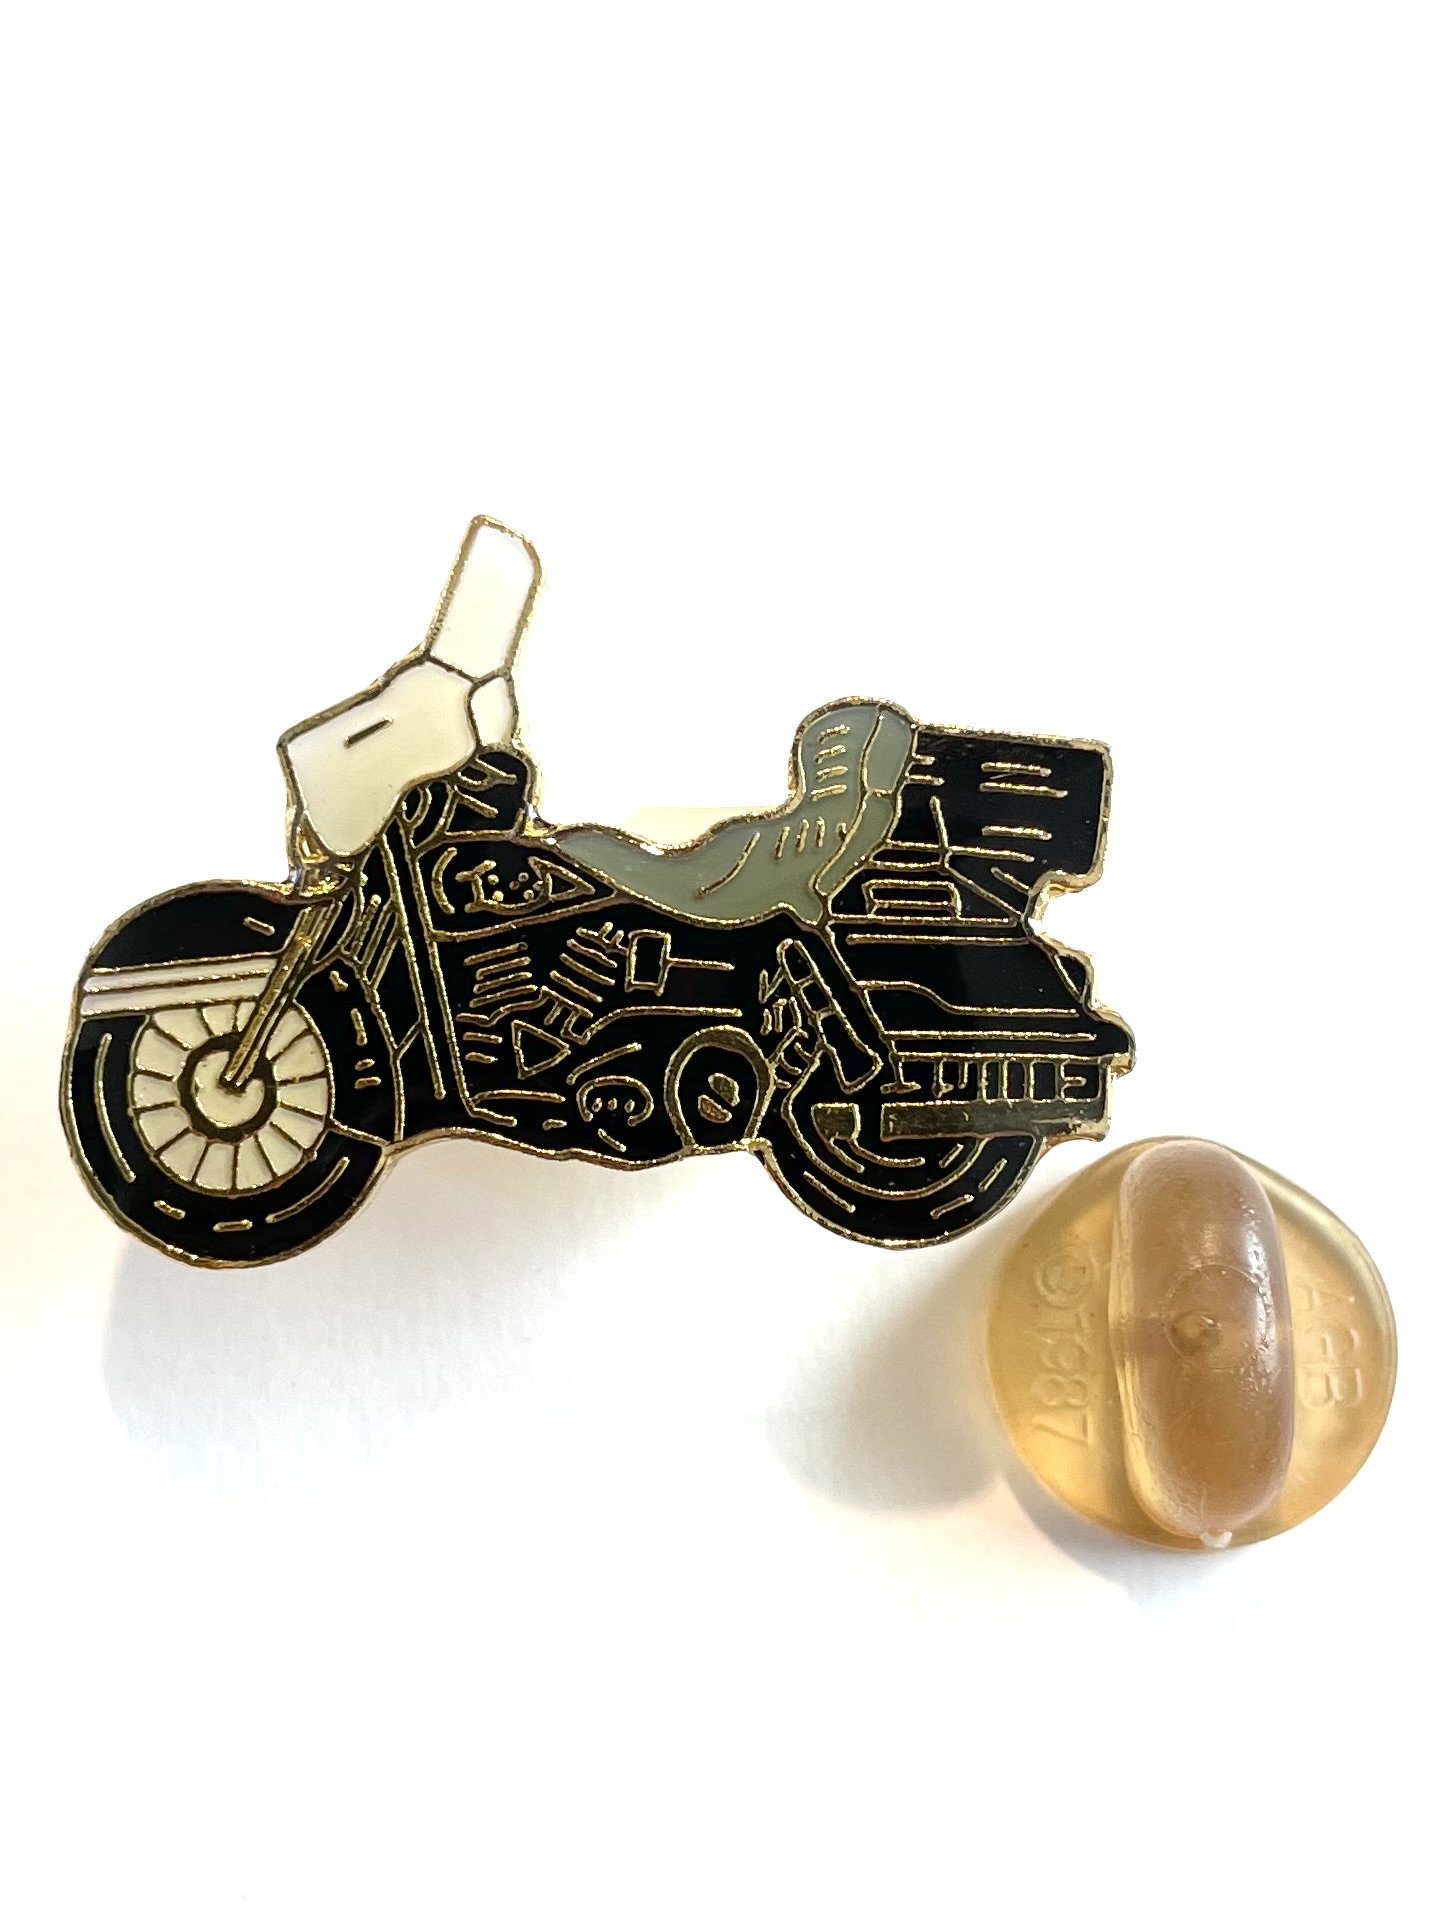 <img class='new_mark_img1' src='https://img.shop-pro.jp/img/new/icons2.gif' style='border:none;display:inline;margin:0px;padding:0px;width:auto;' />1980's BLACK MOTORCYCLE PINS DEADSTOCK